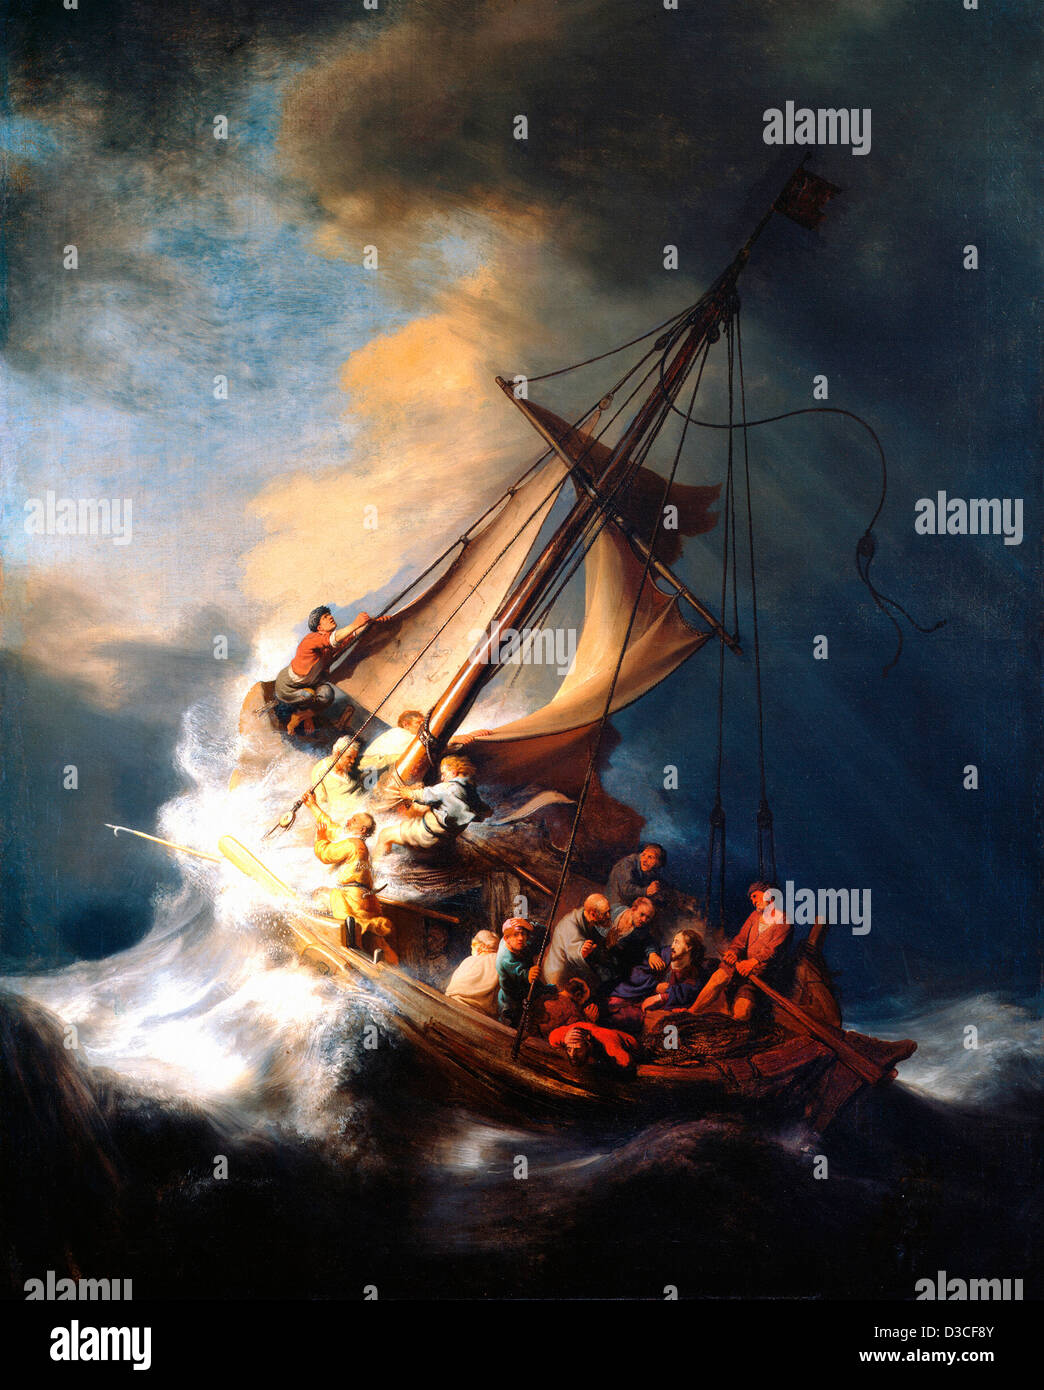 Rembrandt van Rijn, The Storm on the Sea of Galilee. 1633 Oil on canvas. Baroque. Stolen. Stock Photo